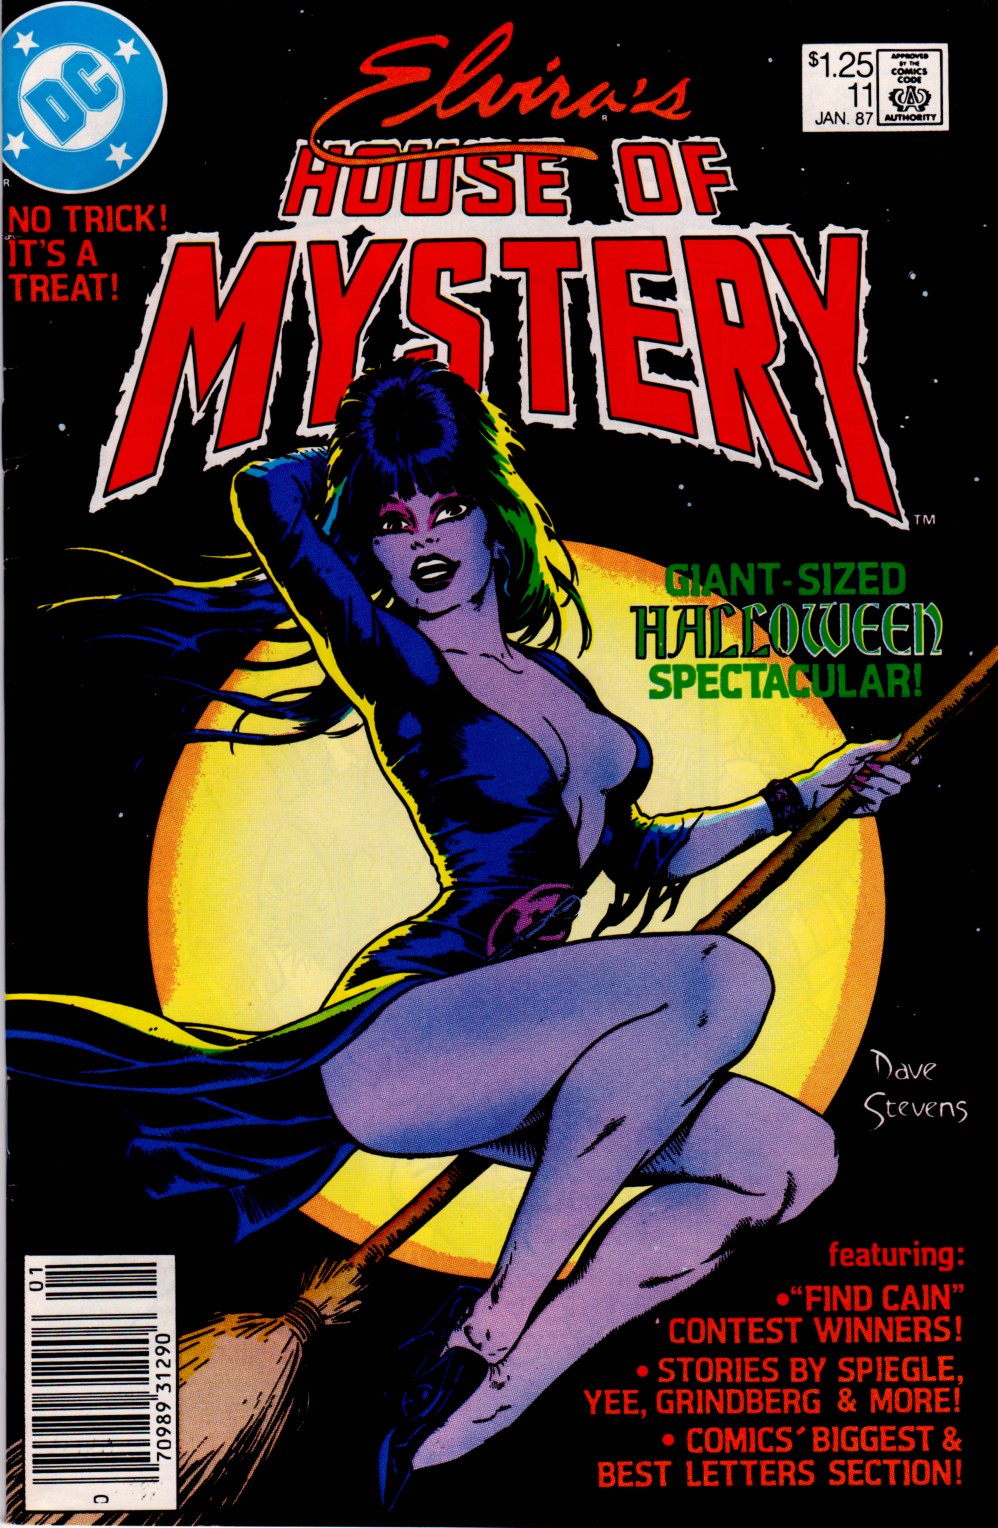 Read online Elvira's House of Mystery comic -  Issue #11 - 1